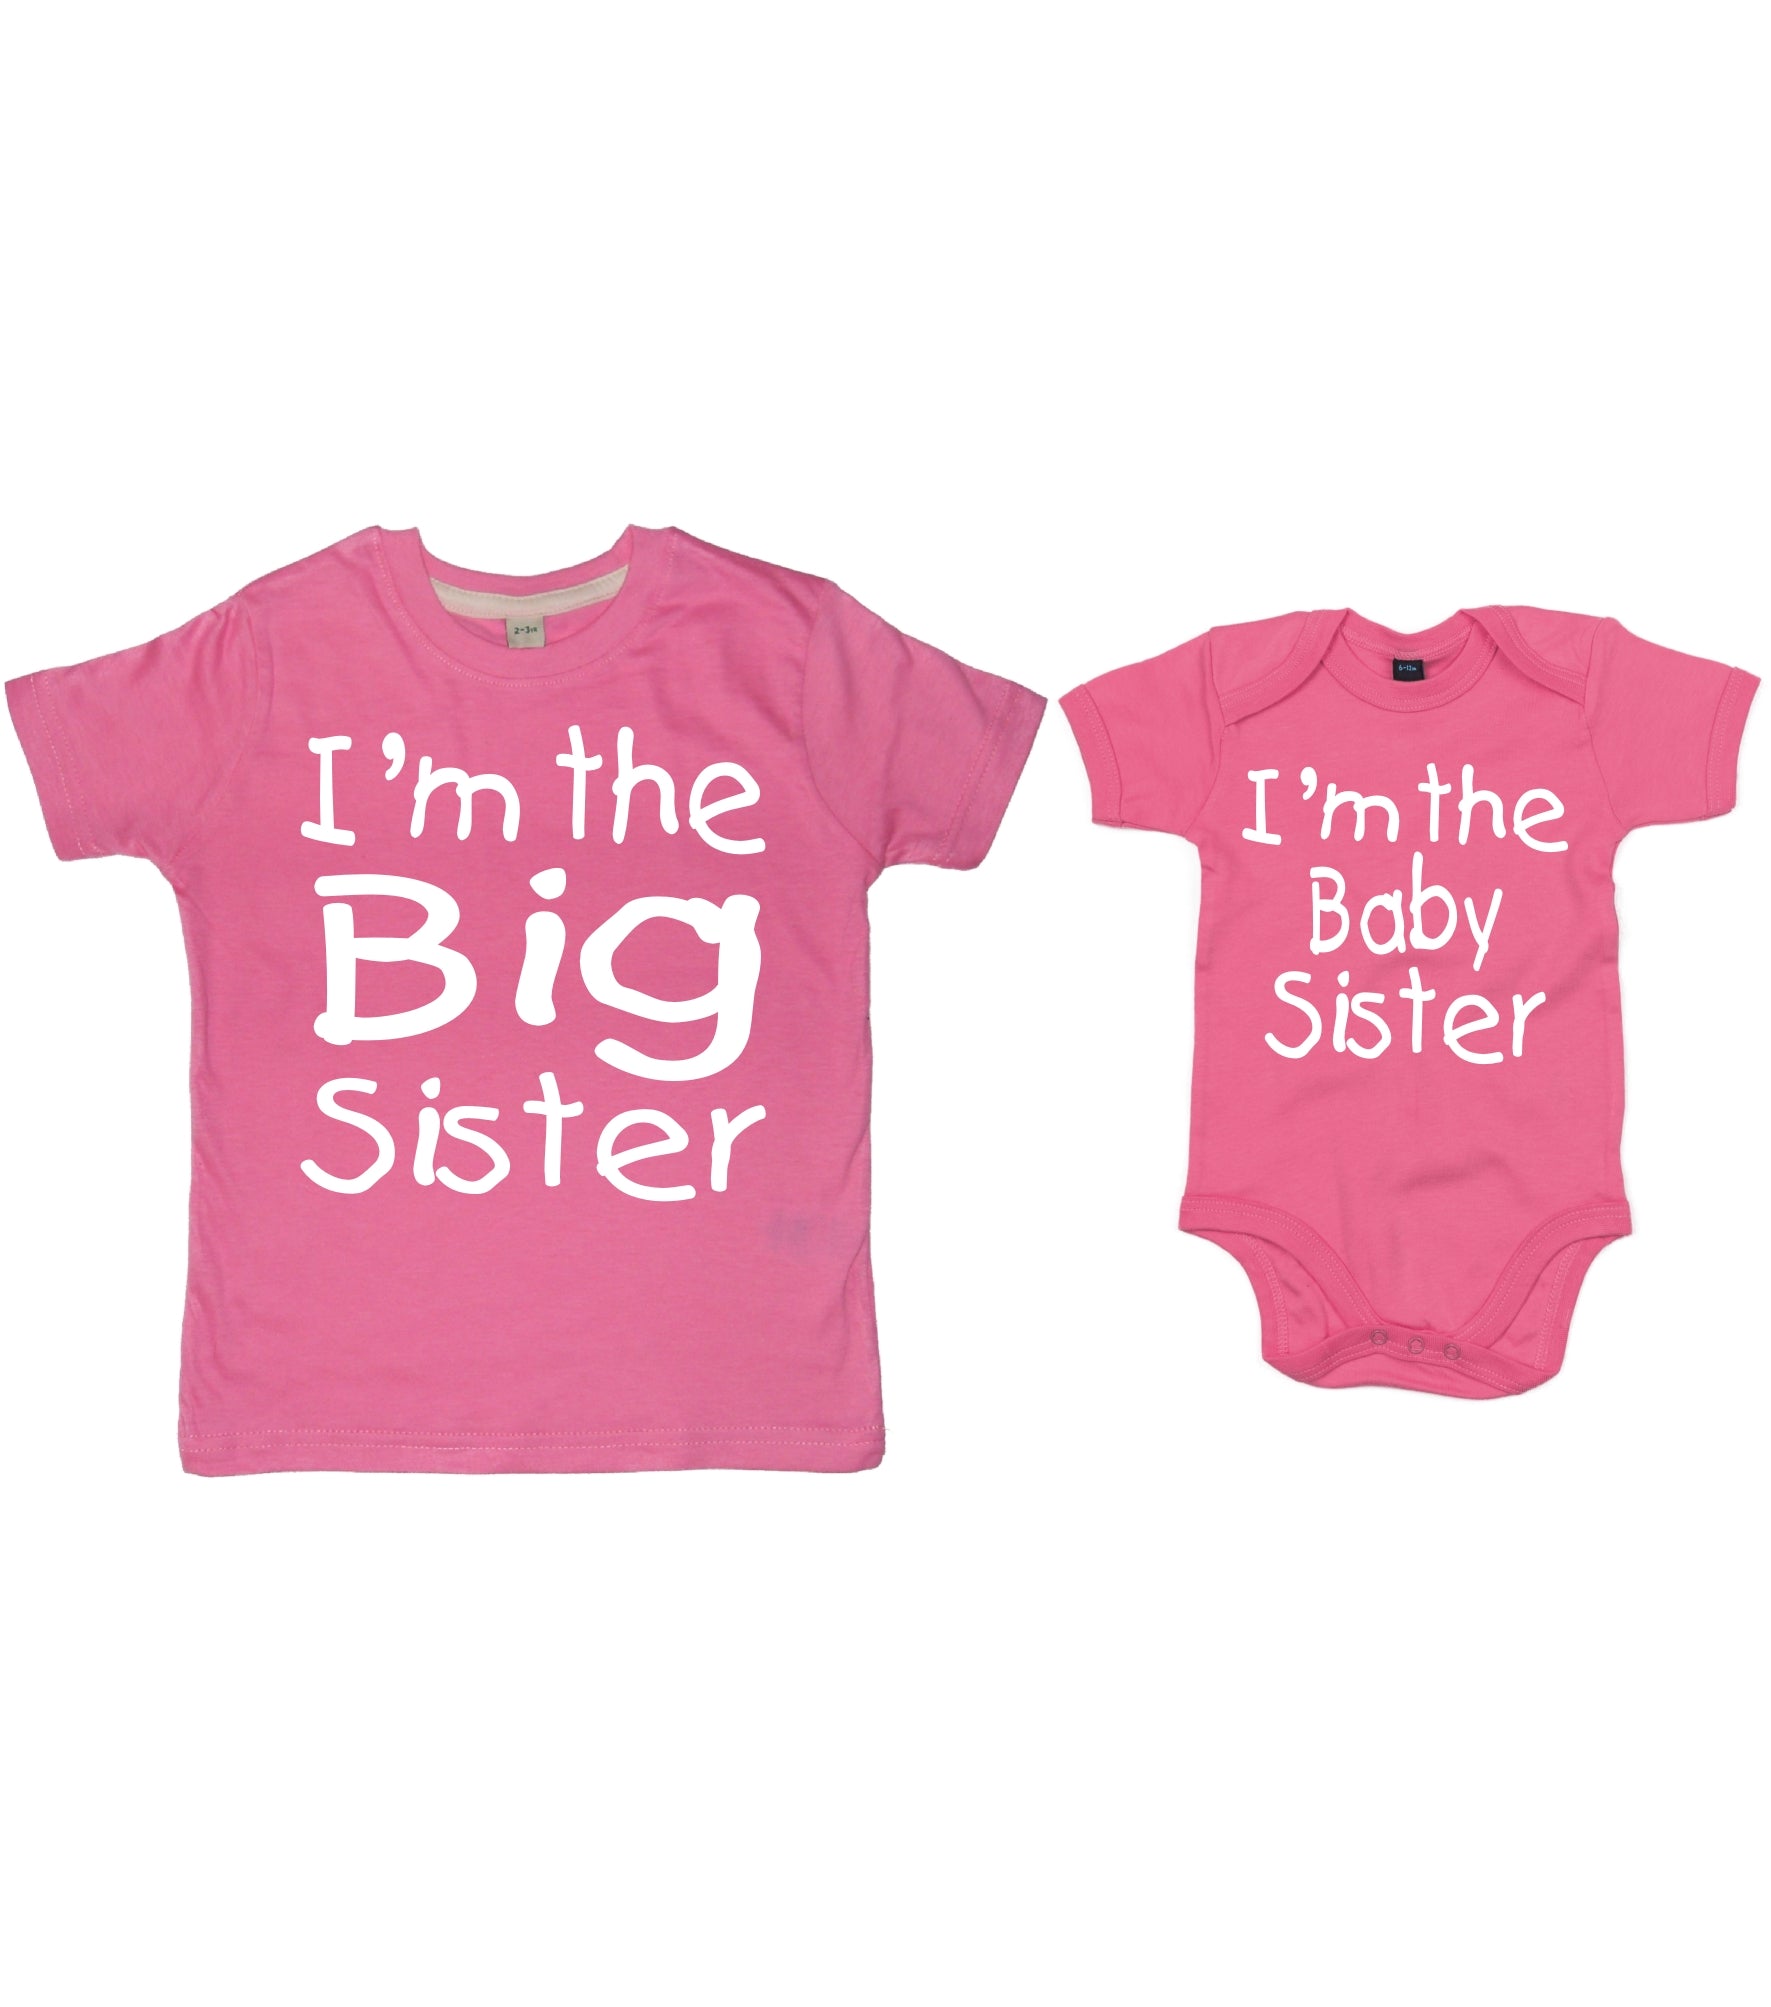 I'm the Big Sister T-shirt and I'm the Baby Sister Bodysuit Set